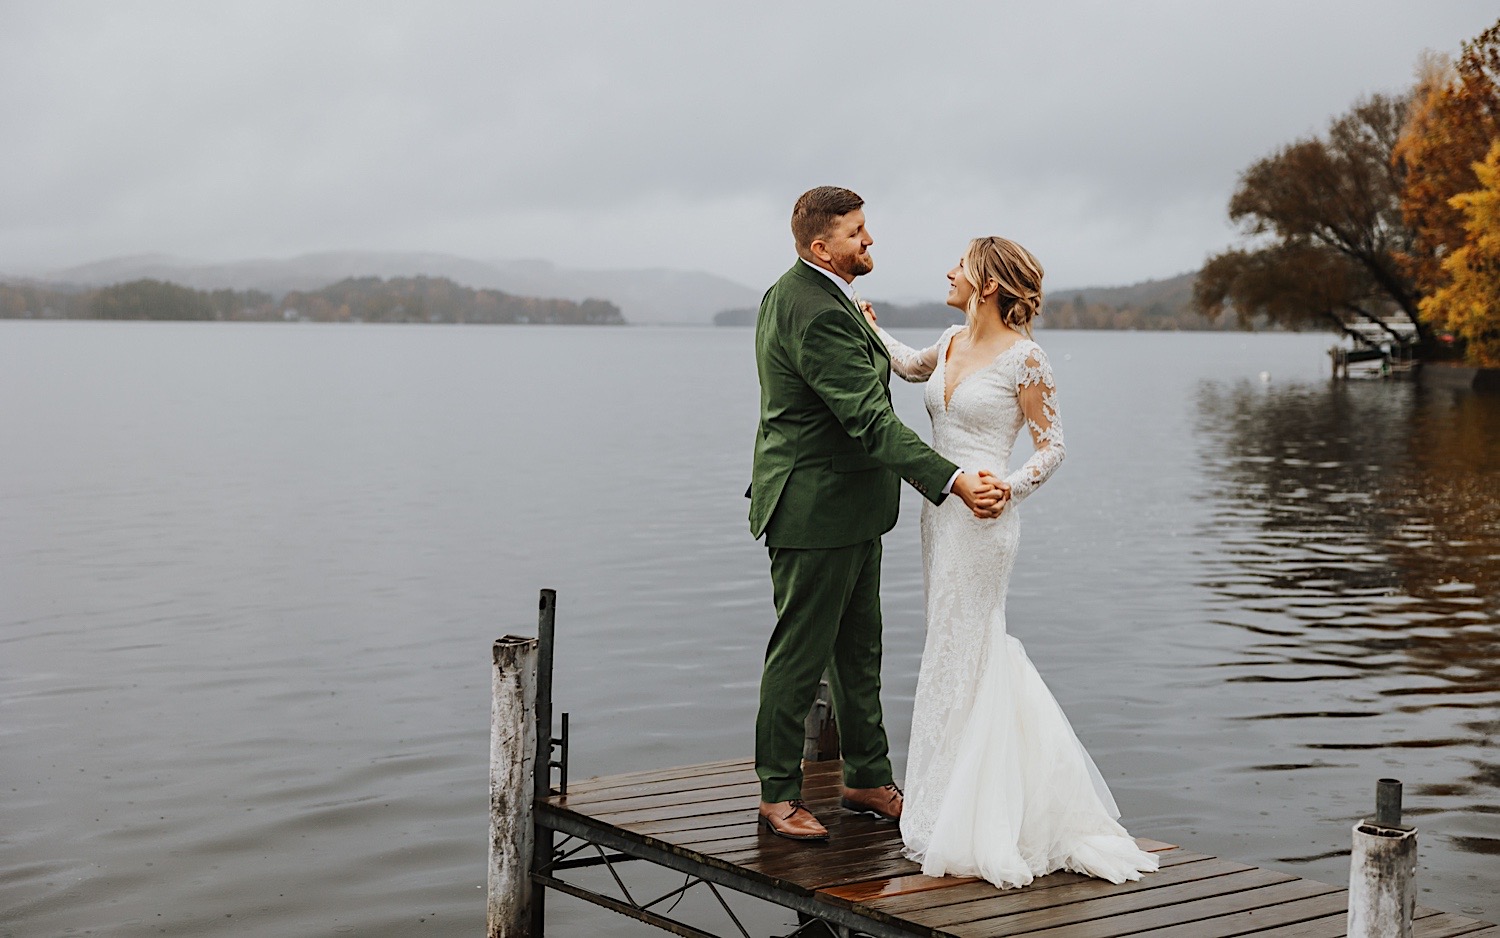 While on a dock on Lake Bomoseen in Vermont, a bride and groom smile at one another while dancing together